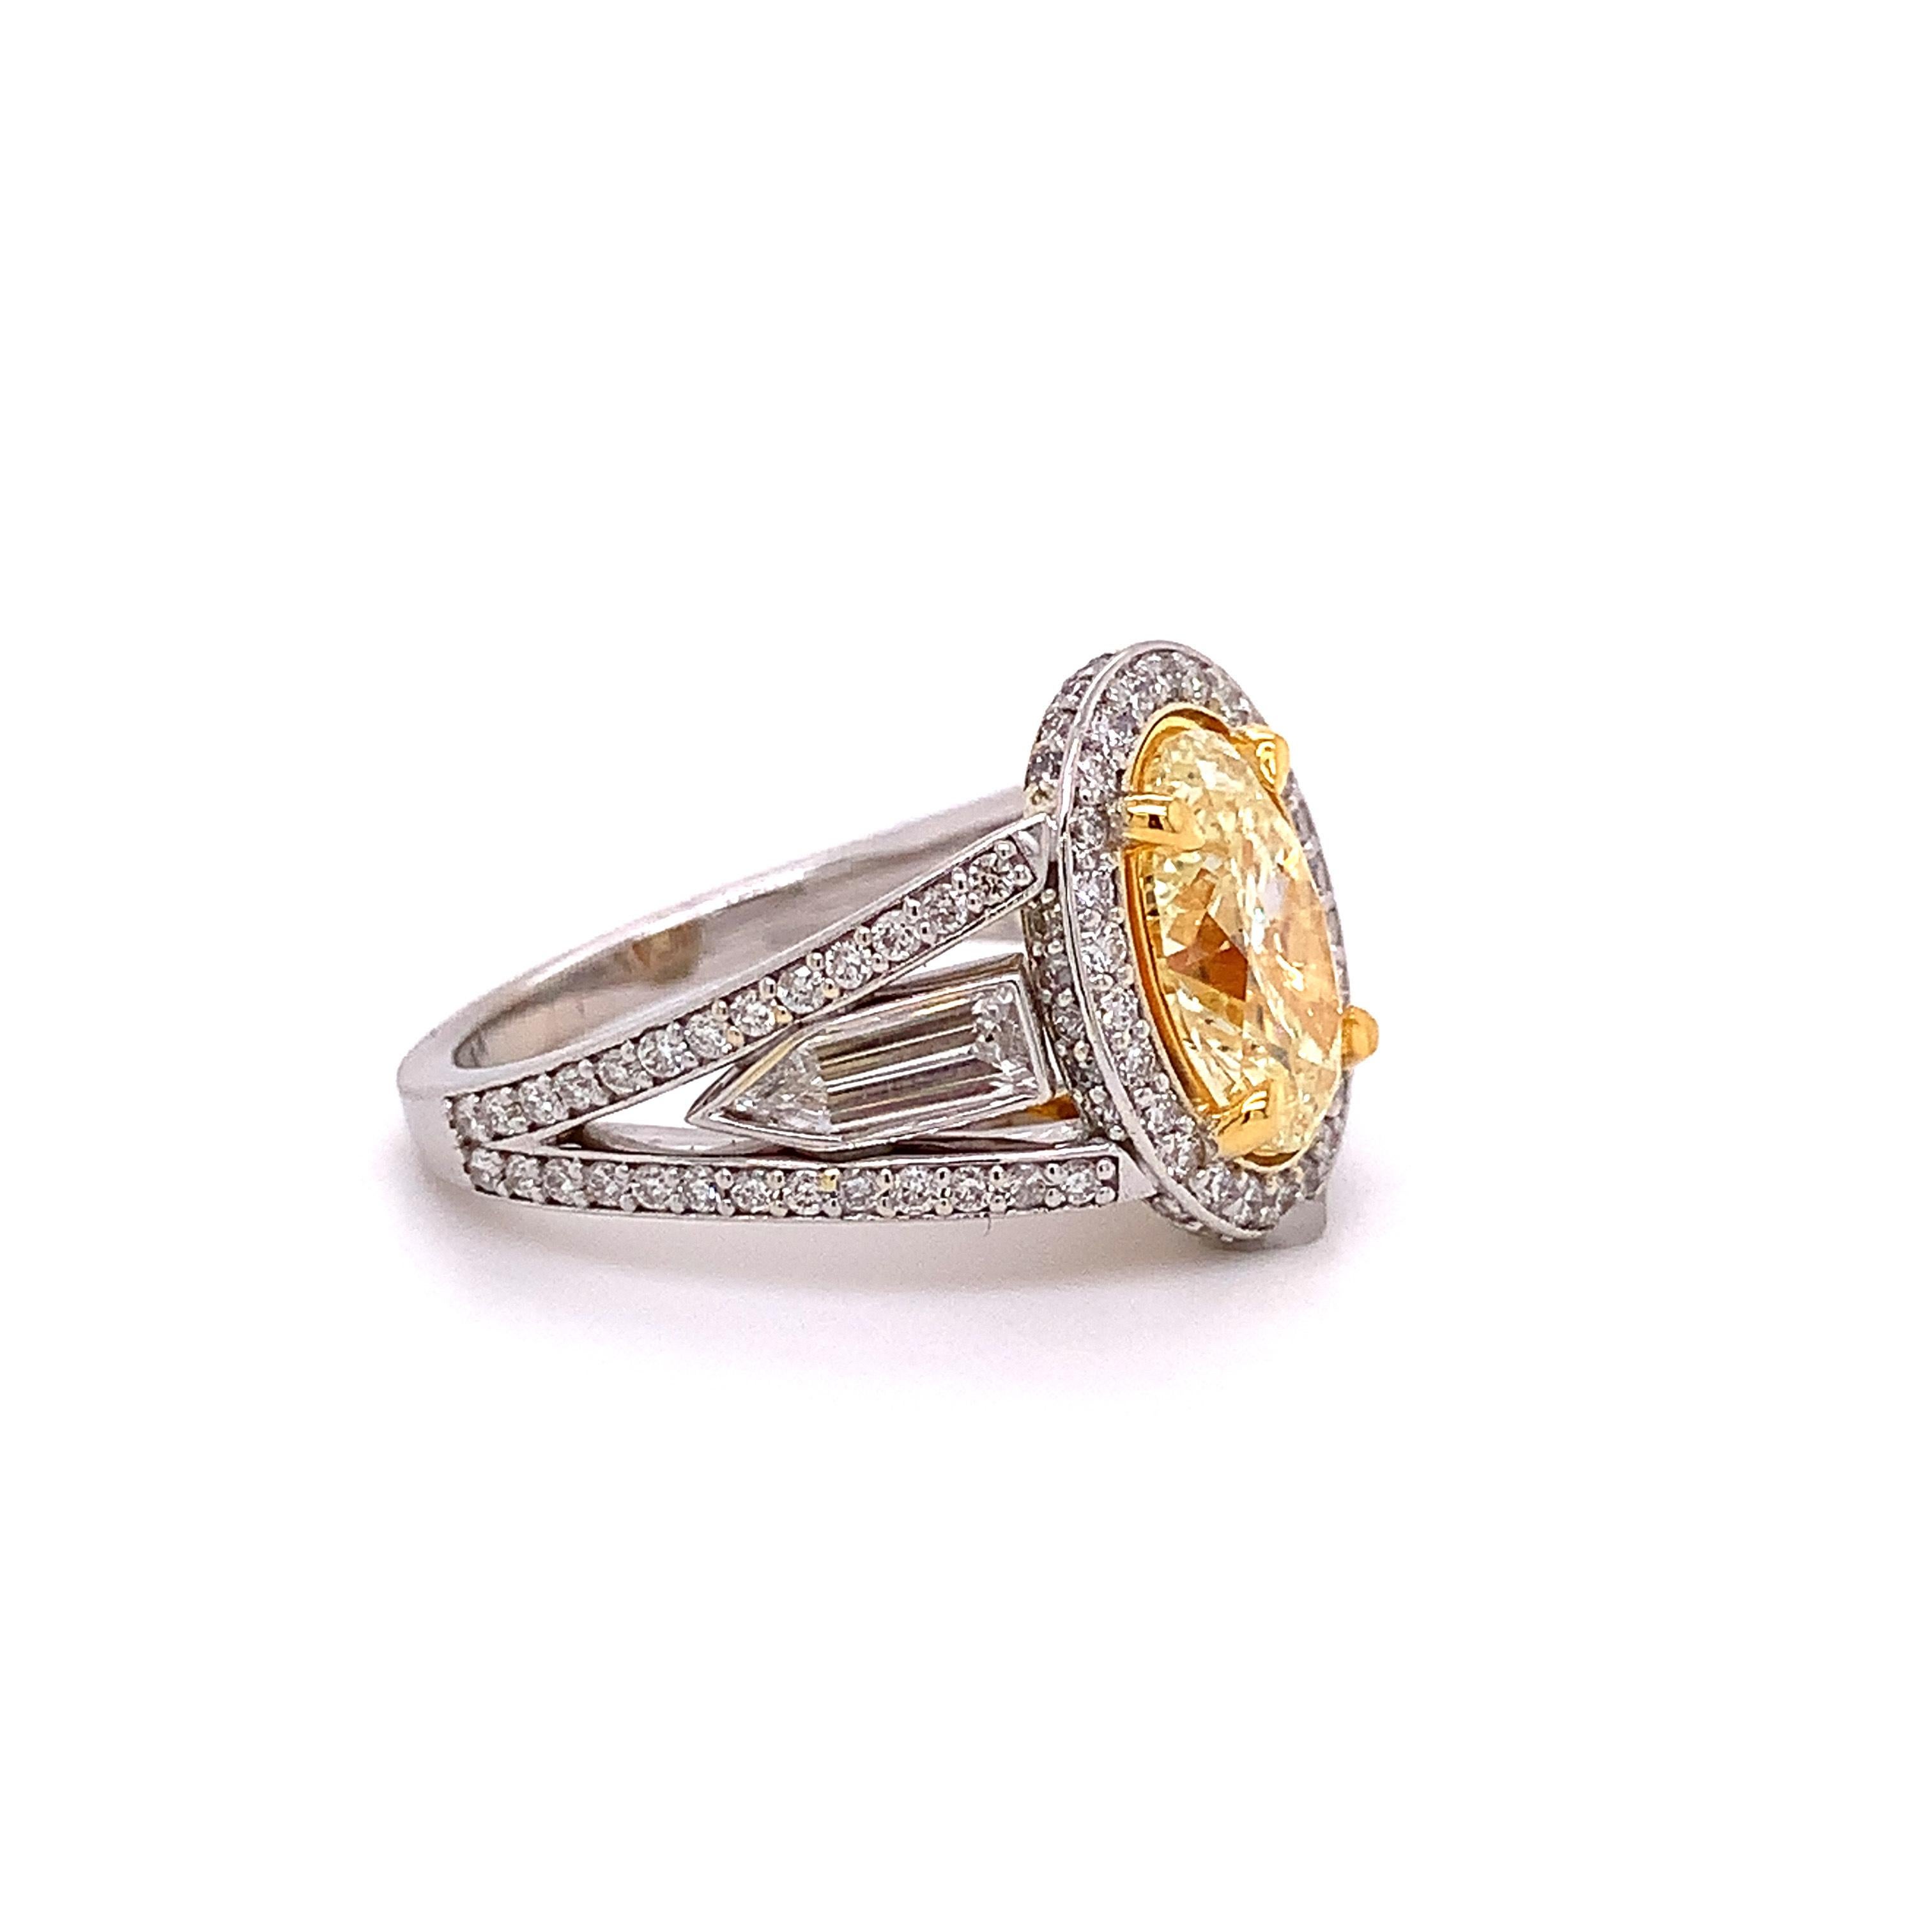 A lovely exceptional engagement ring featuring a yellow (Y-Z color, VS1 clarity) oval-shaped diamond weighing 2.01 carats. 

This ring also features two bullet shaped diamonds (0.49 CTTW) and is set beautifully with white diamonds on the halo and